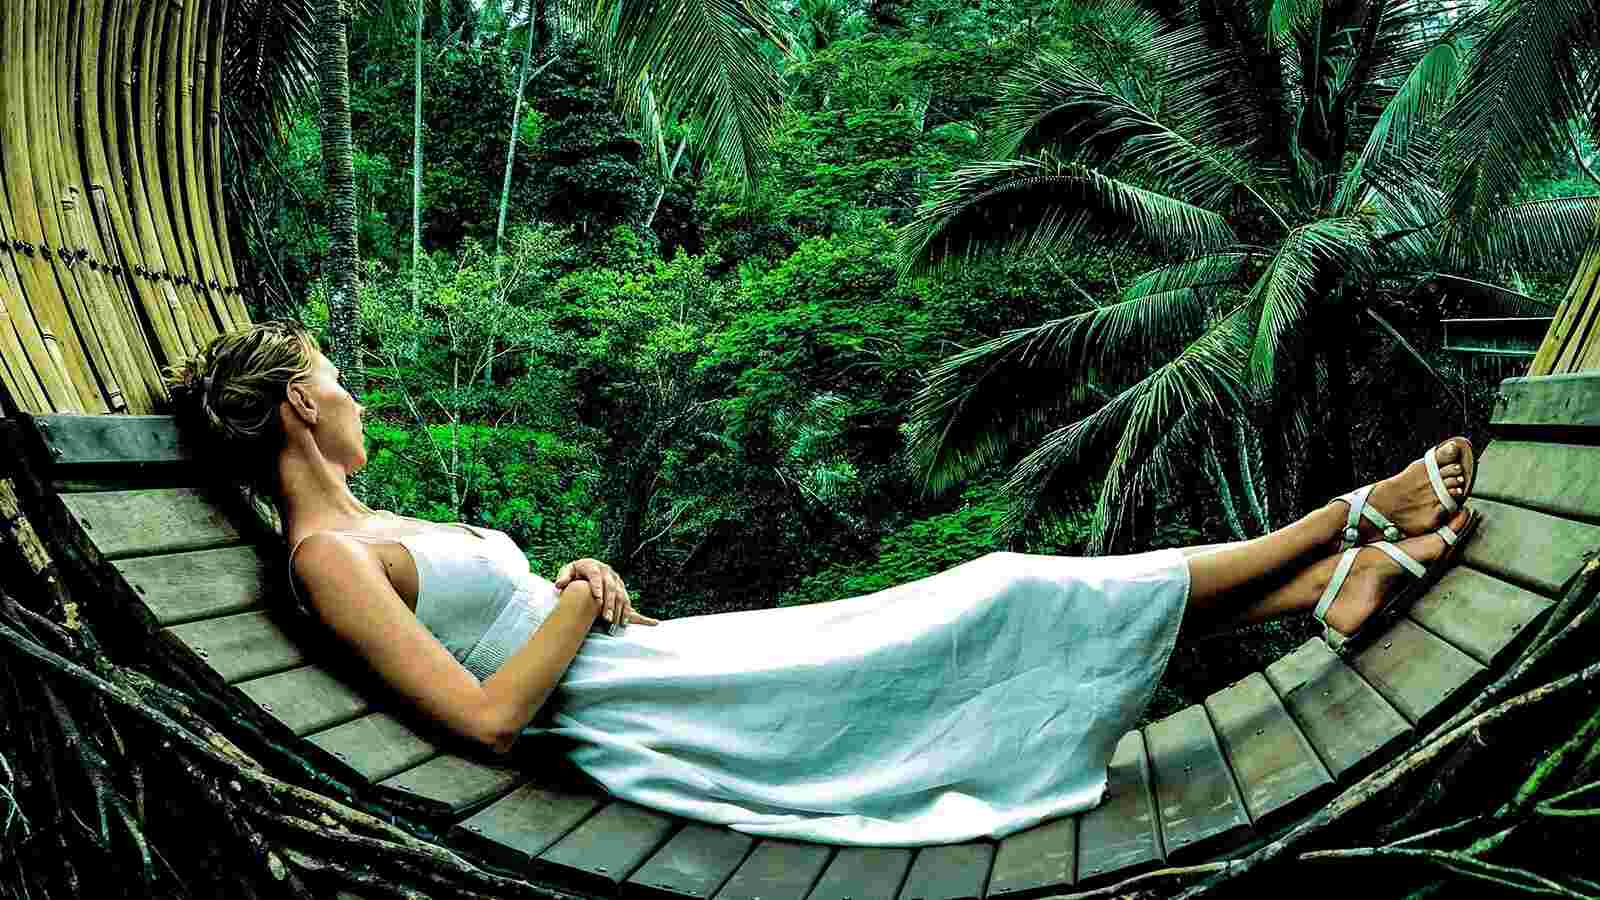 a young woman in white dress resting in a hammock with vivid green forest in the background